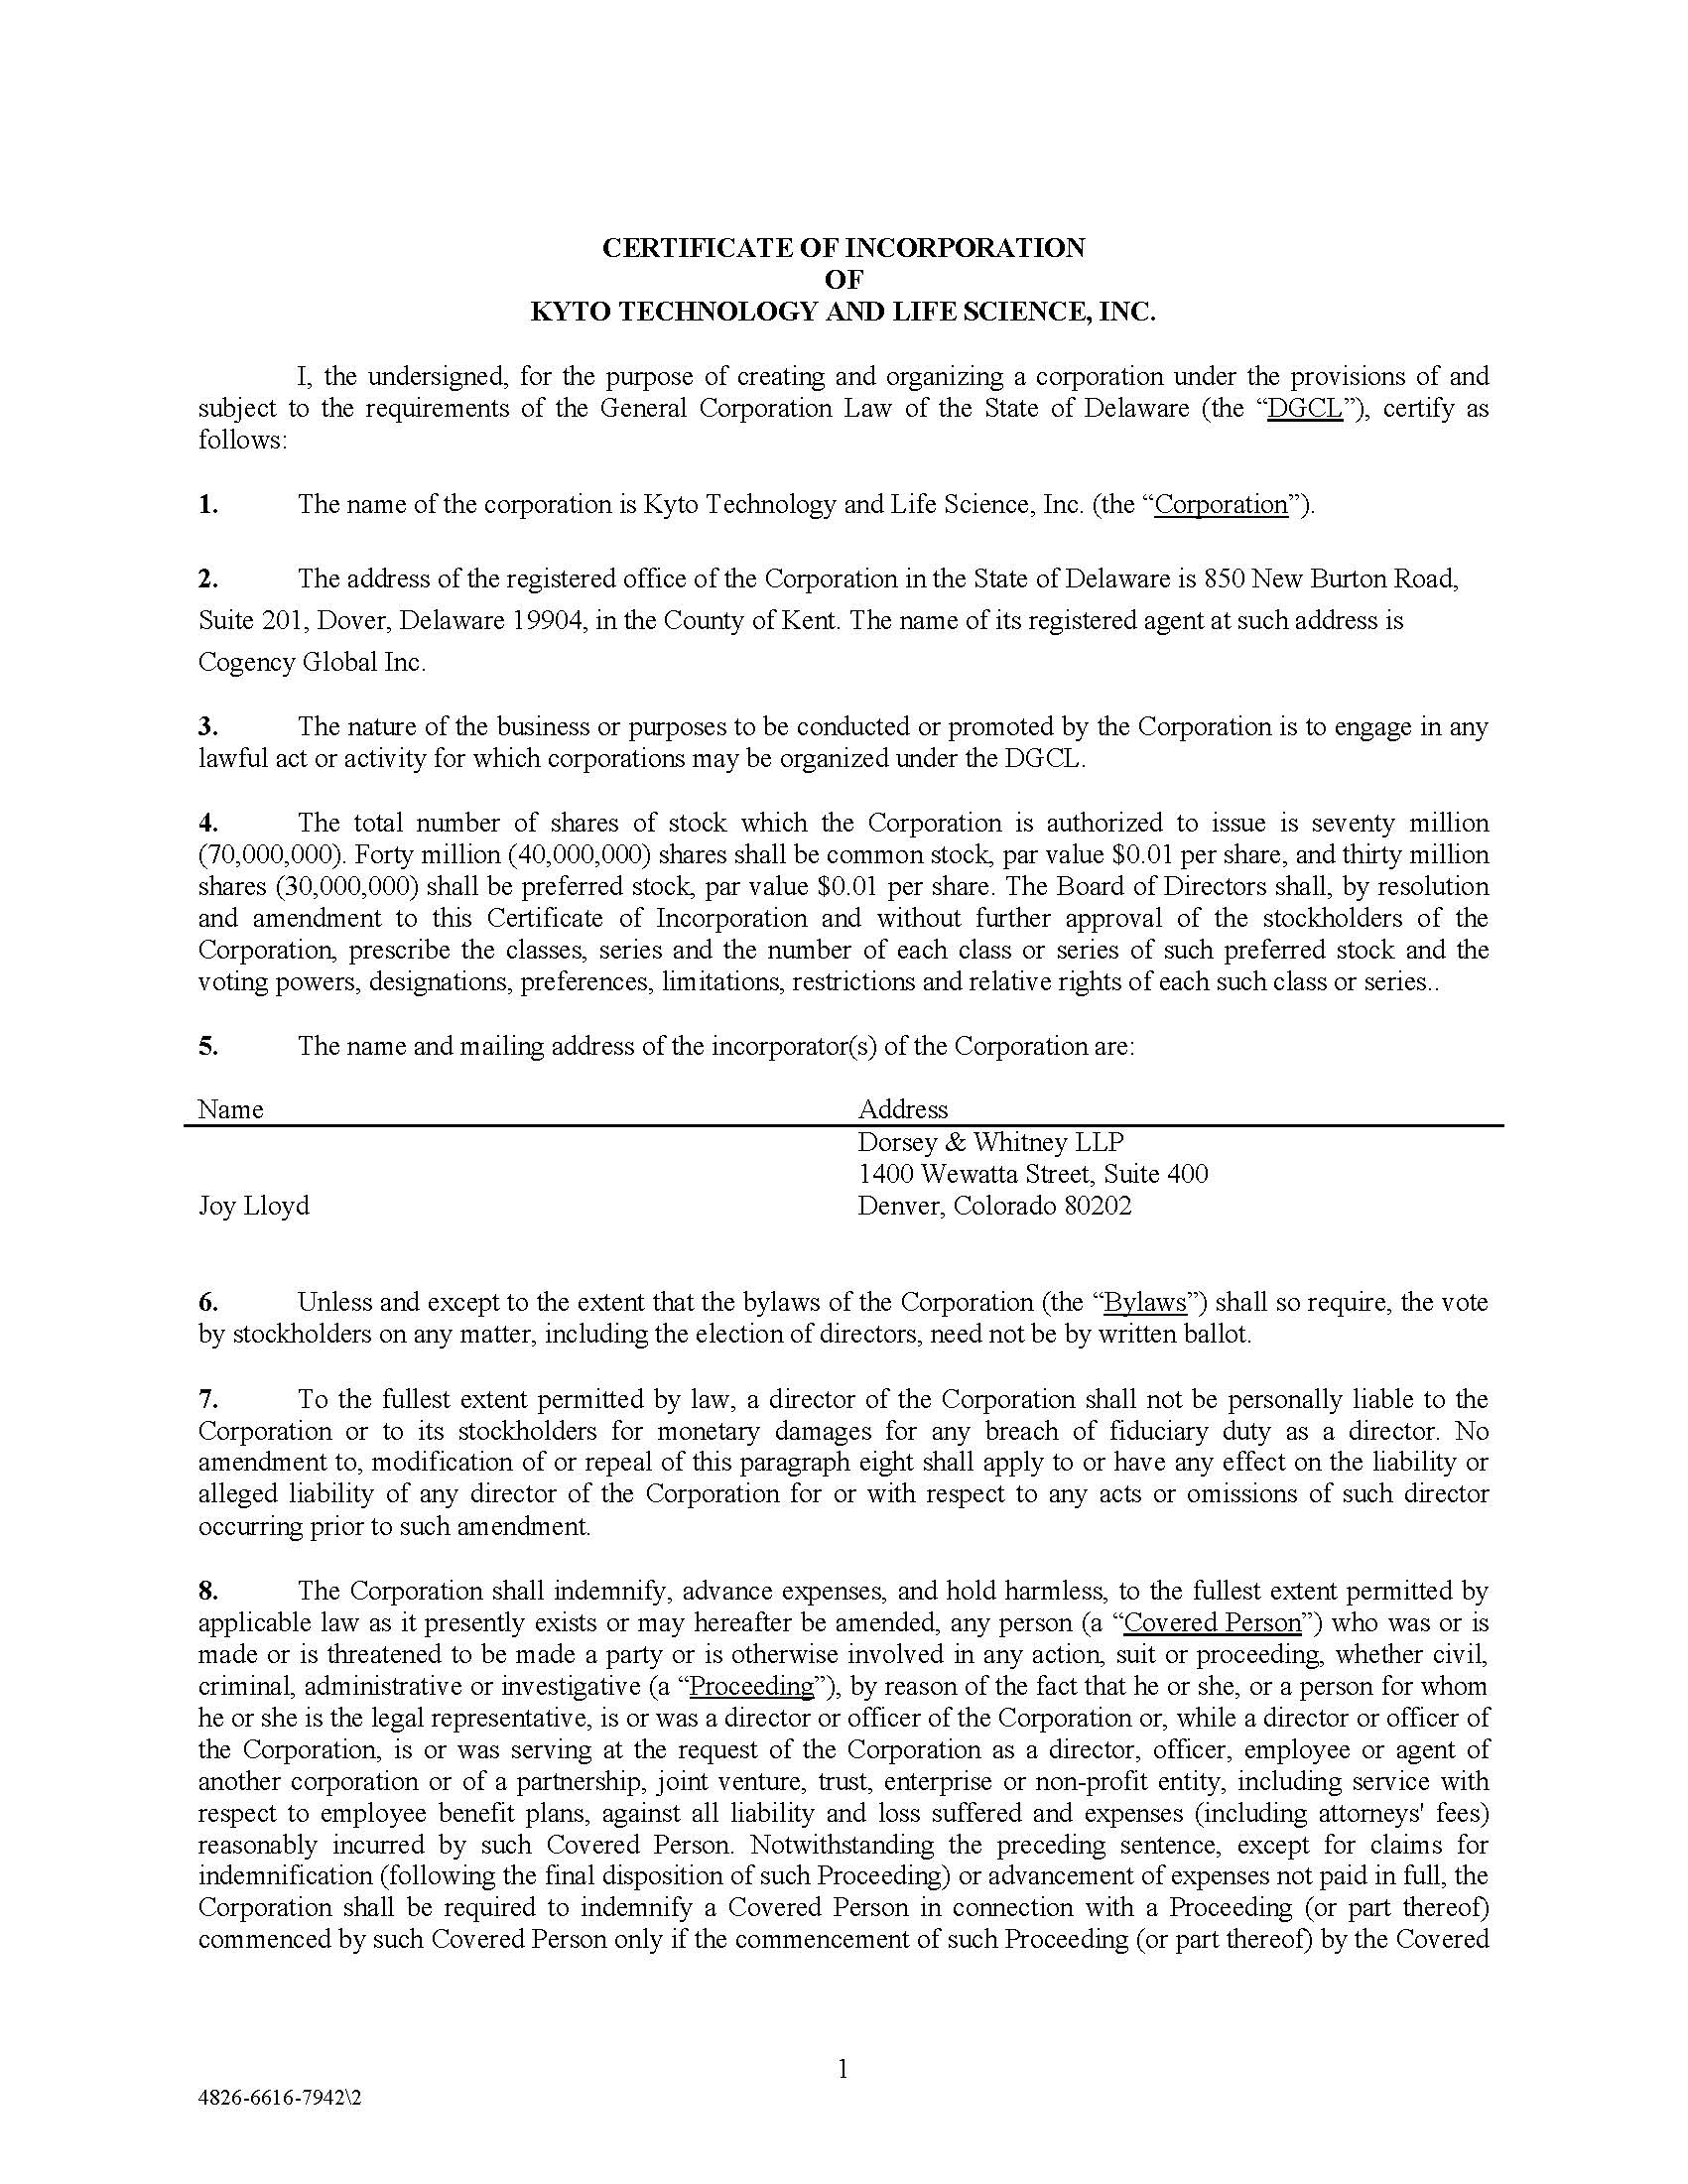 Kyto-  Certificate of Incorporation DE_Page_1.jpg